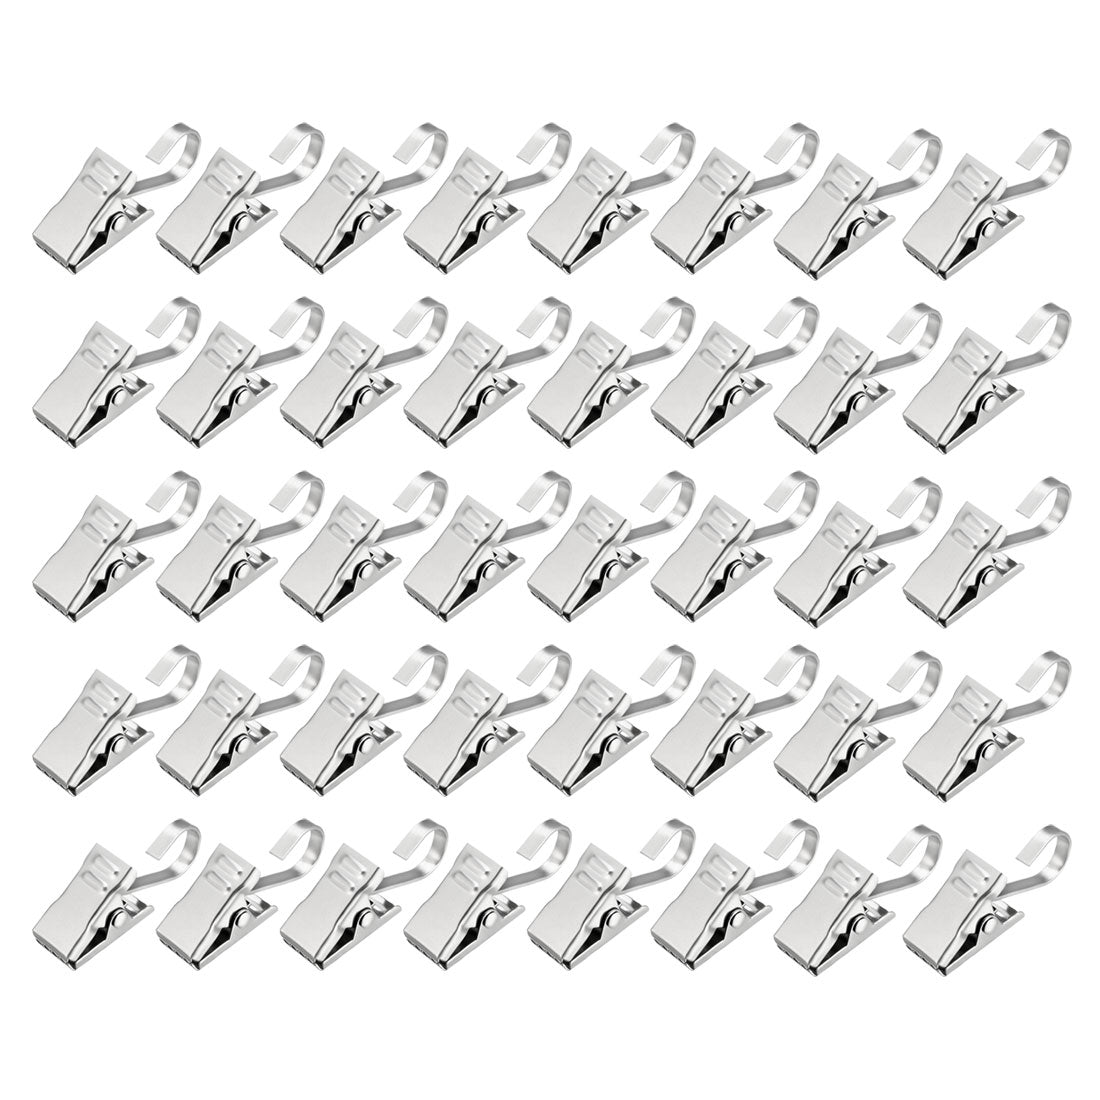 uxcell Uxcell Curtain Clip Hook Set Clips for Curtain Photos Home Decoration Art Craft Display 0.71"*0.39" Silver Tone 40pcs